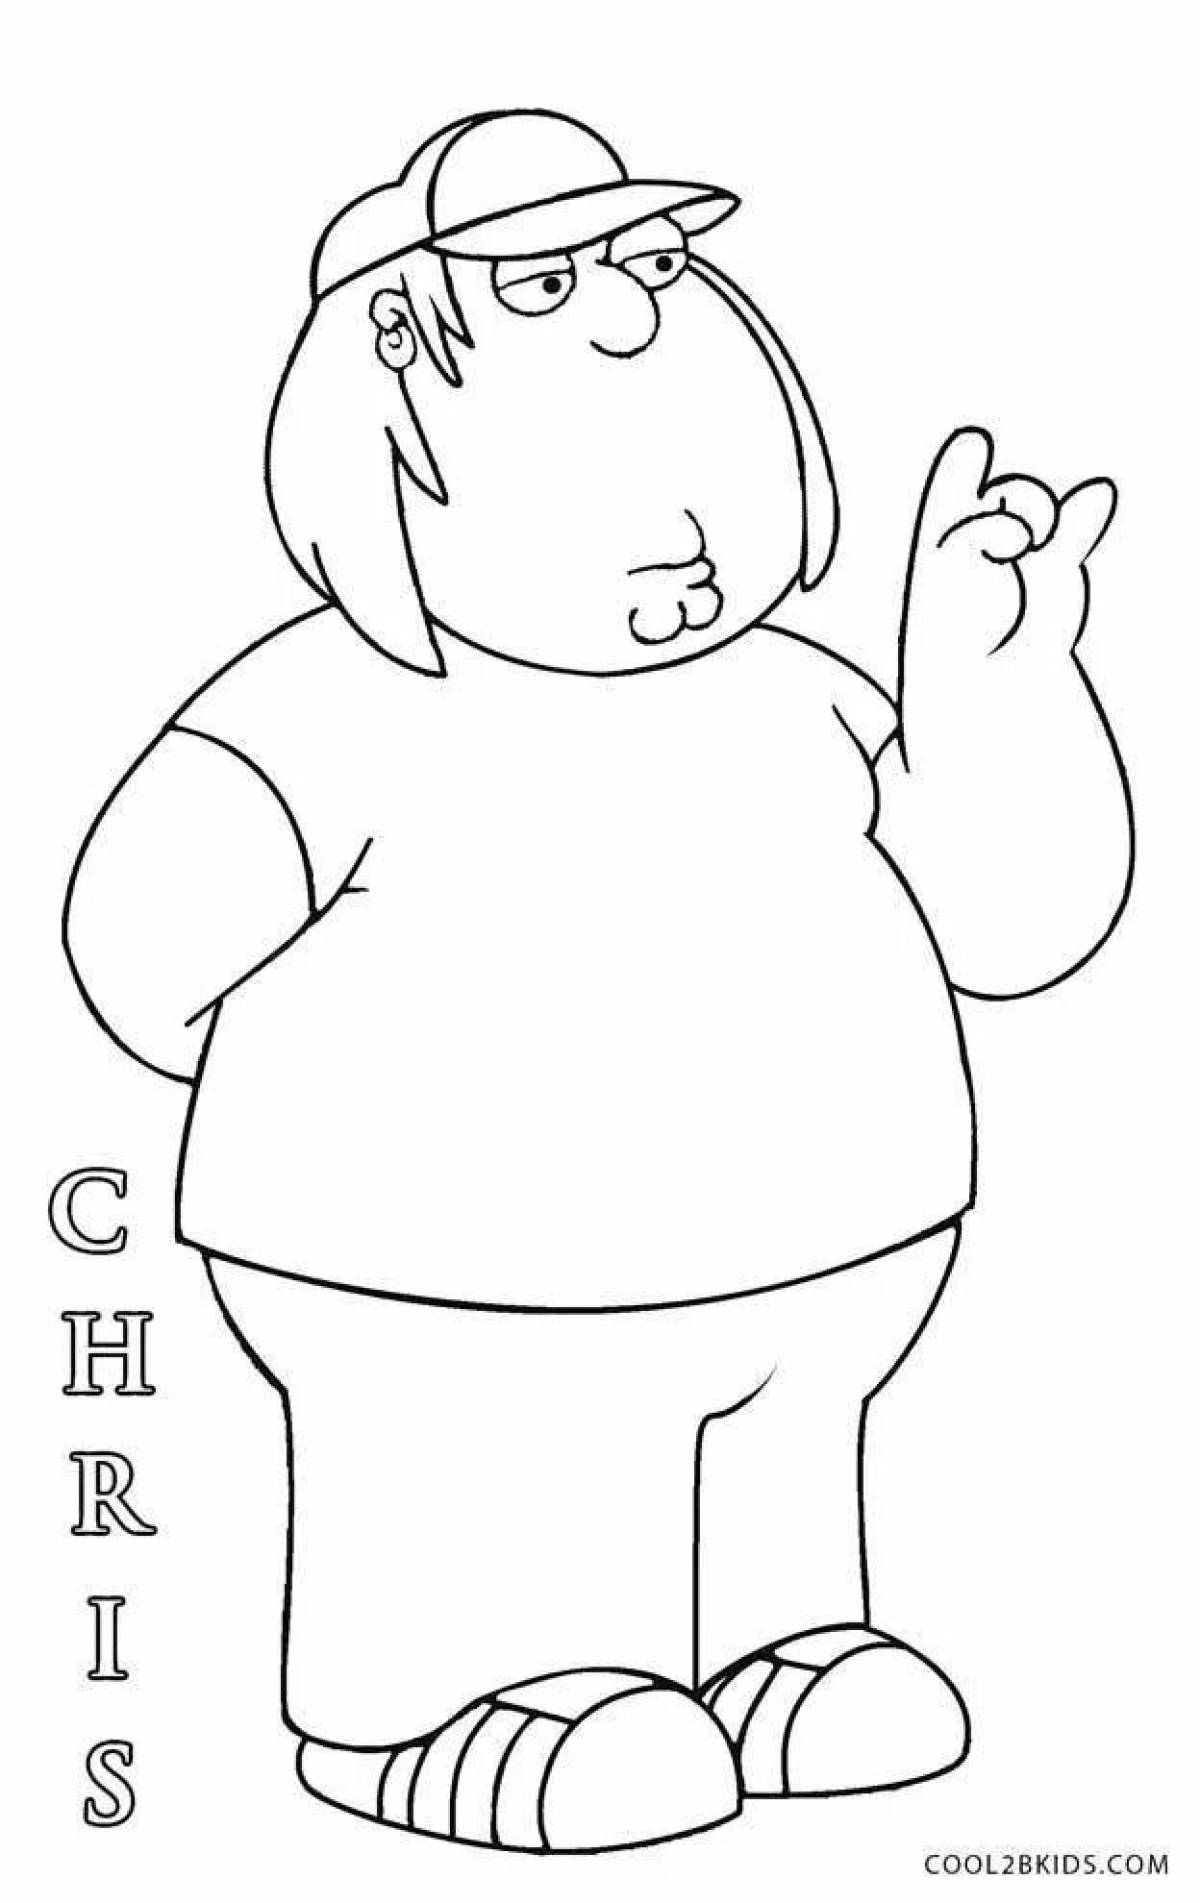 Peter griffin's exciting coloring book